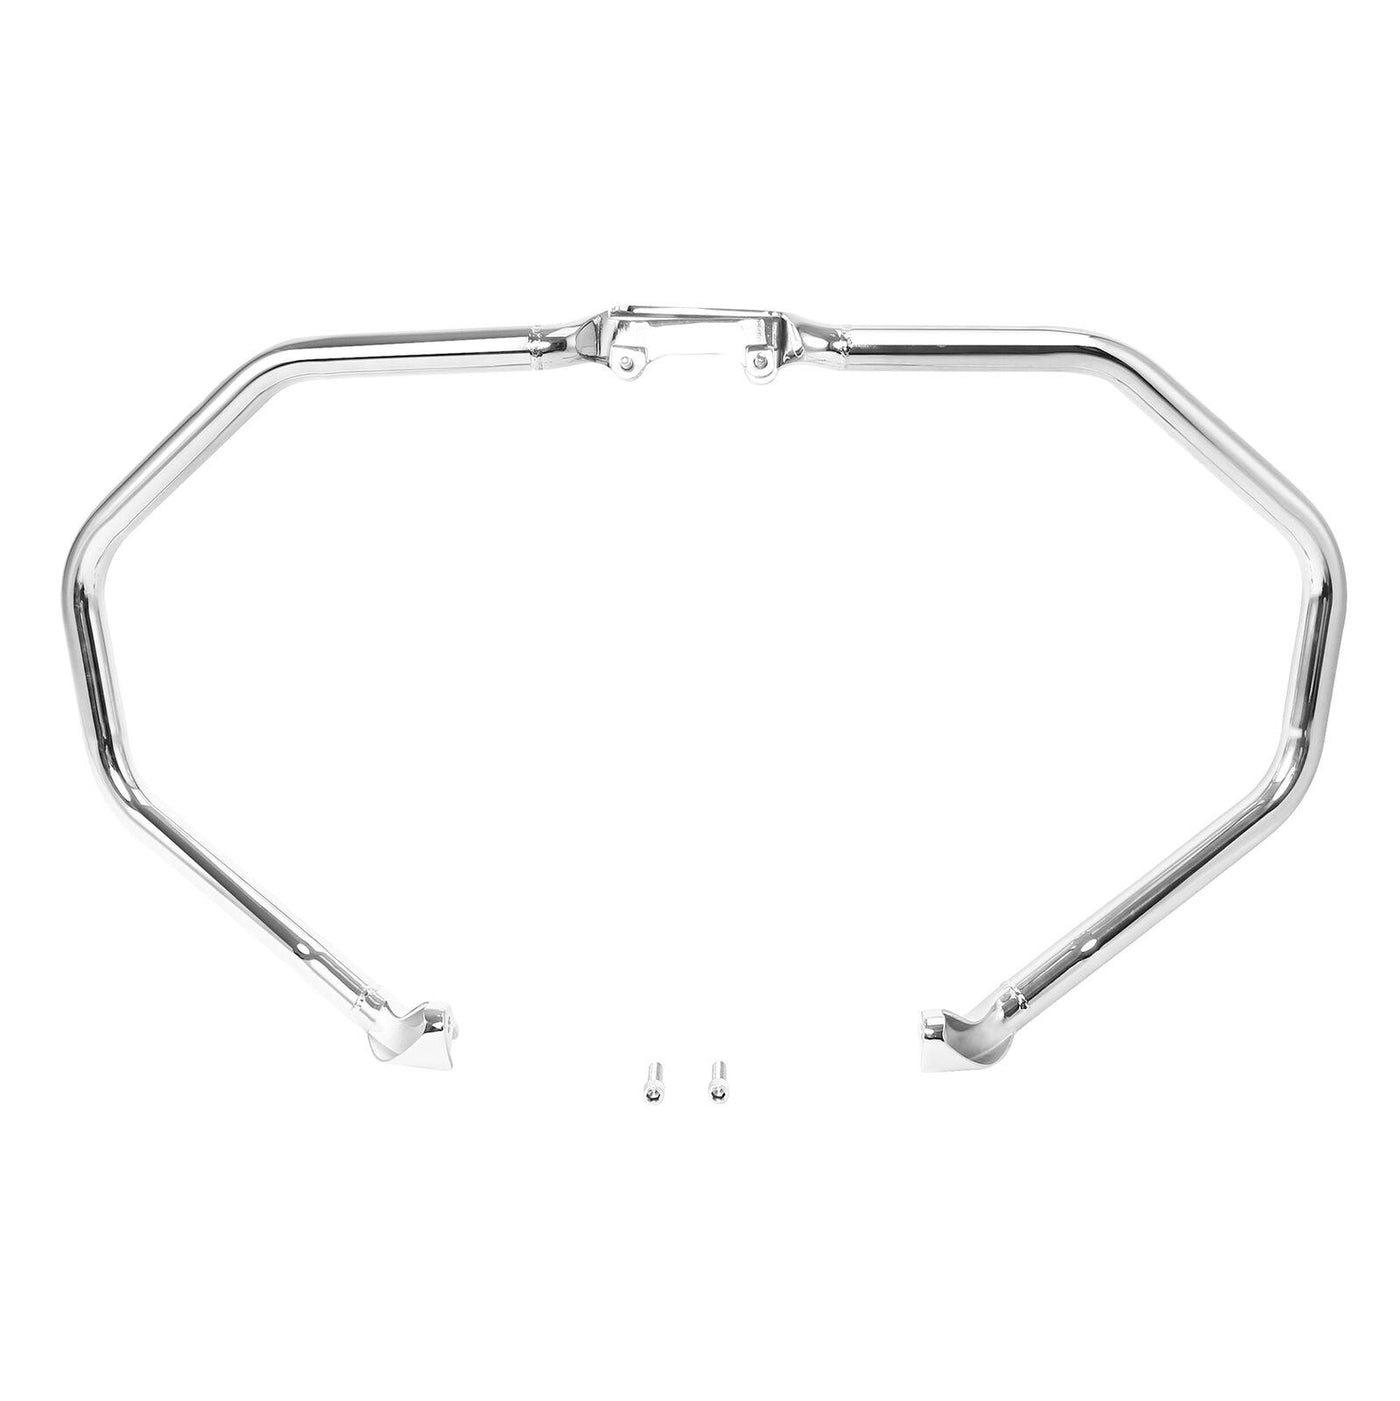 Engine Guard Highway Crash Bar Fit For Indian Chieftain 14-21 Dark Horse 16-21 - Moto Life Products